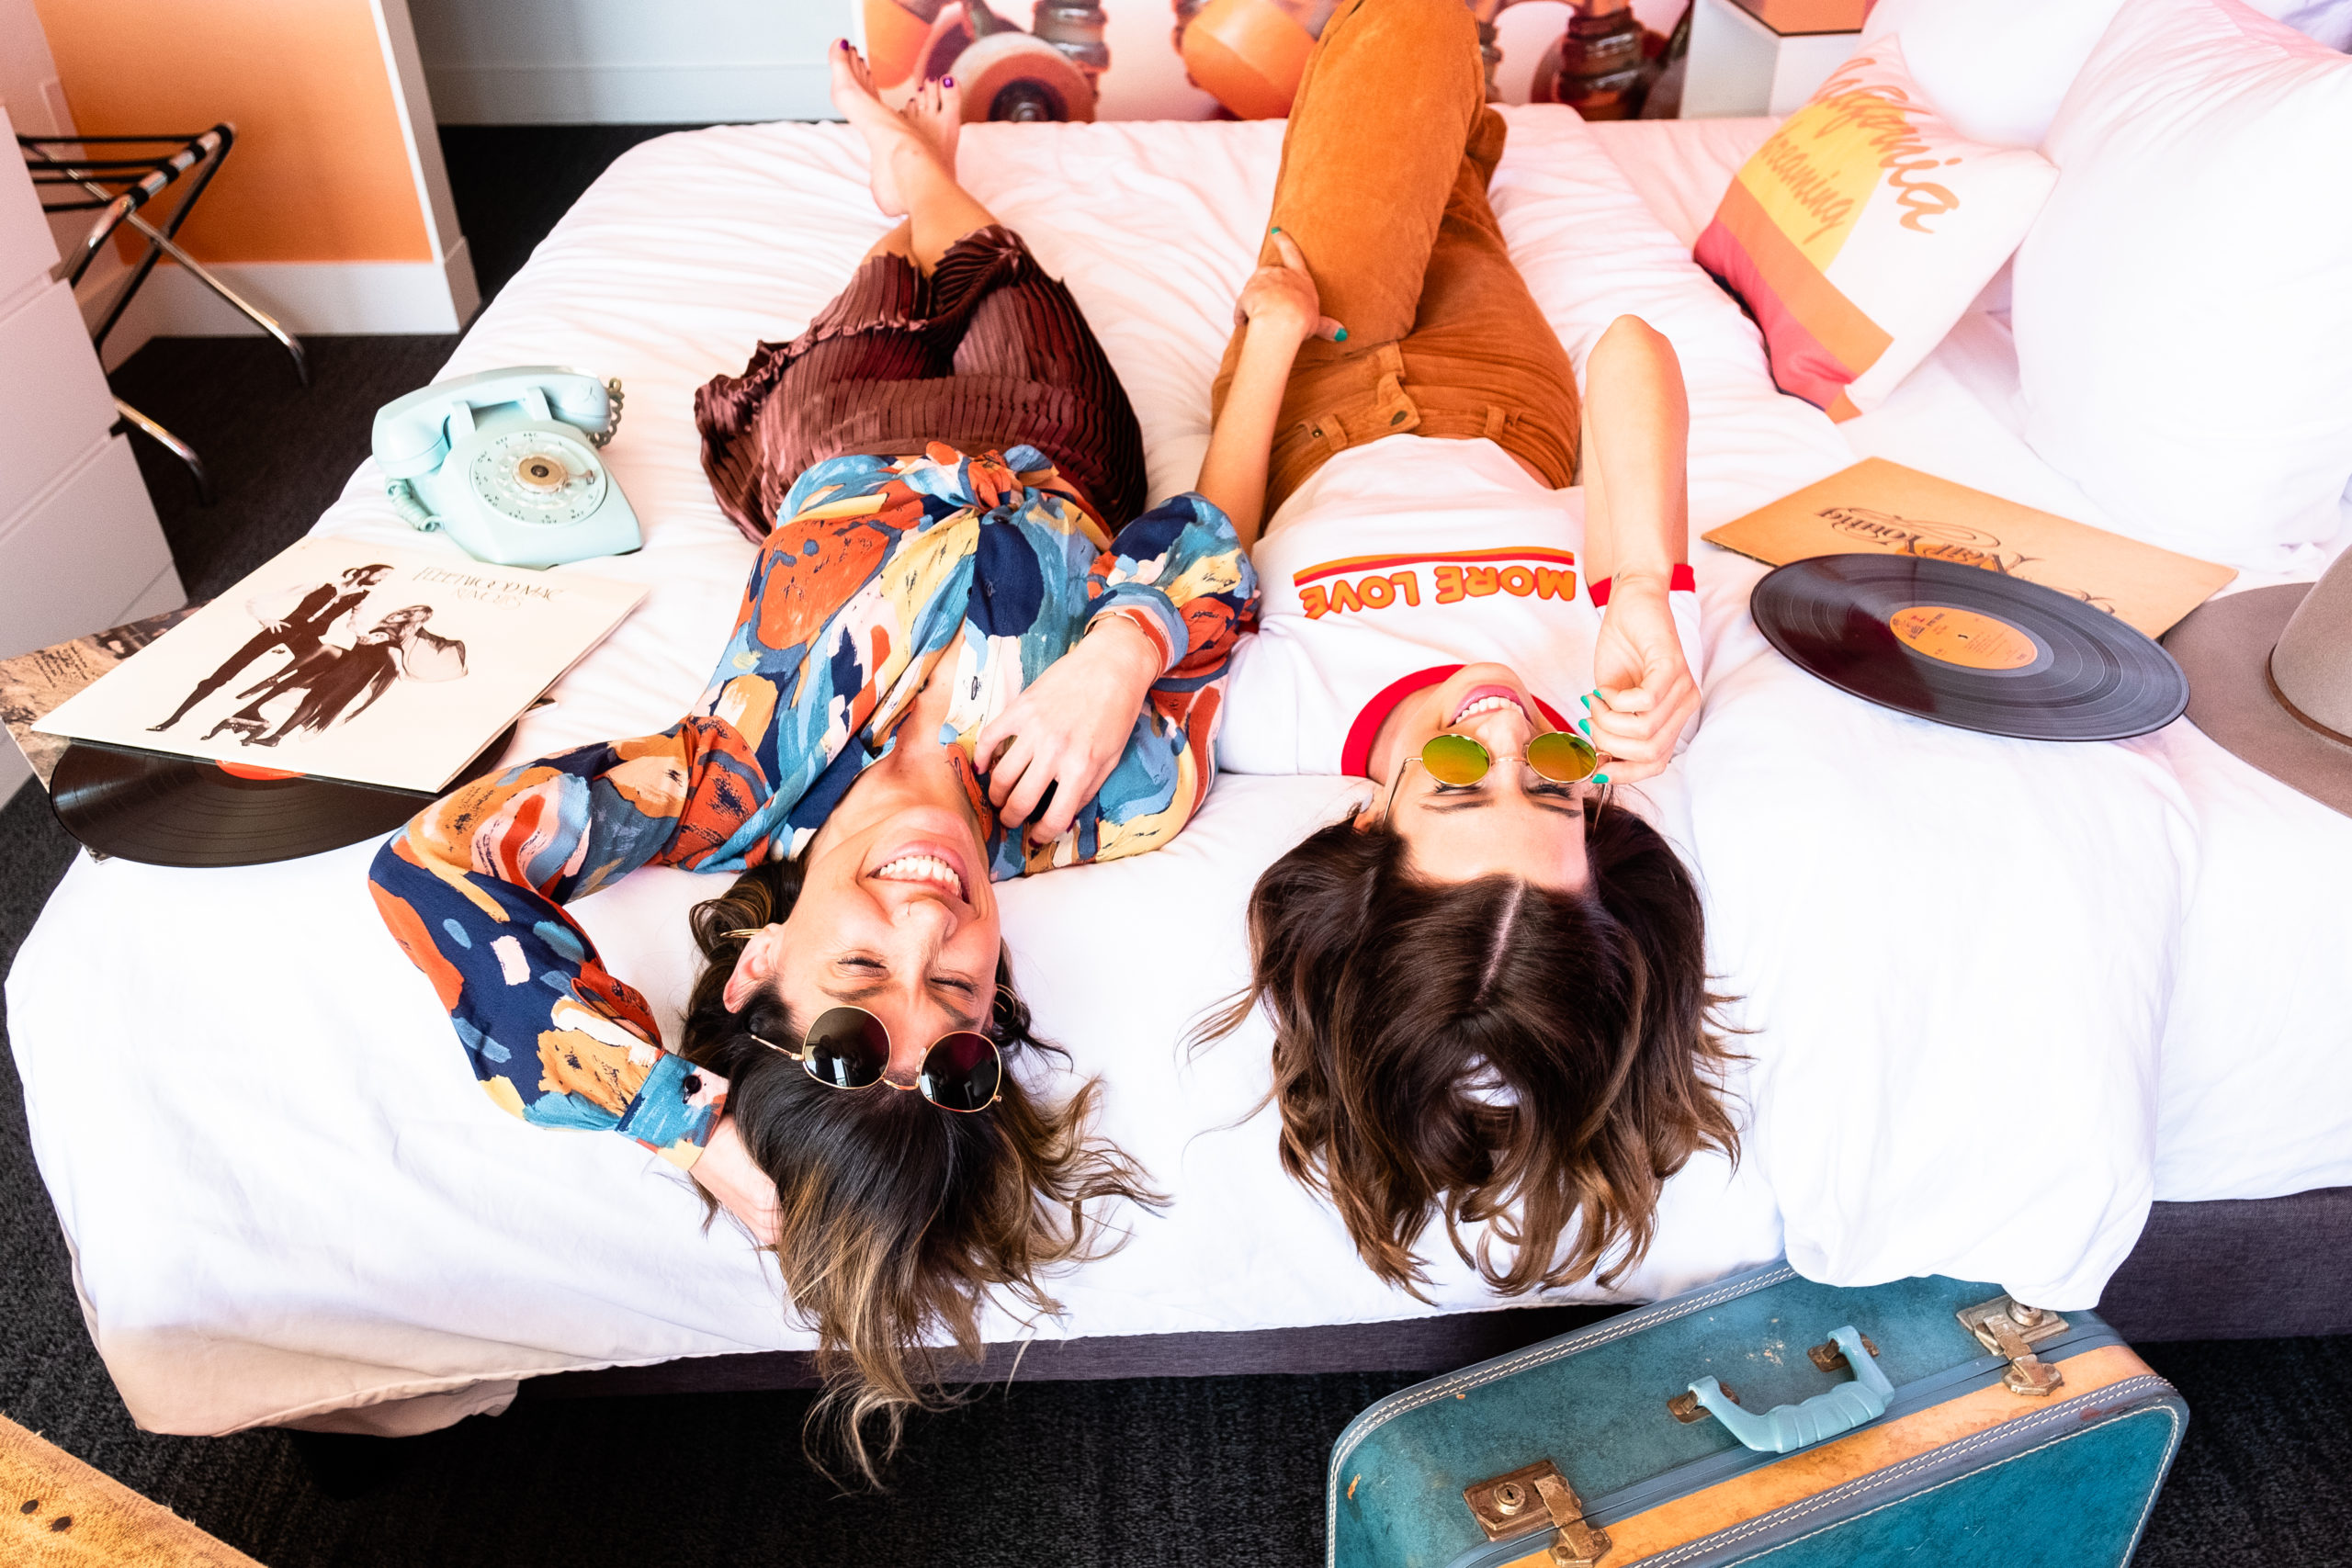 Two girls in sunglasses laying on a bed surrounded by records and suitcases smiling